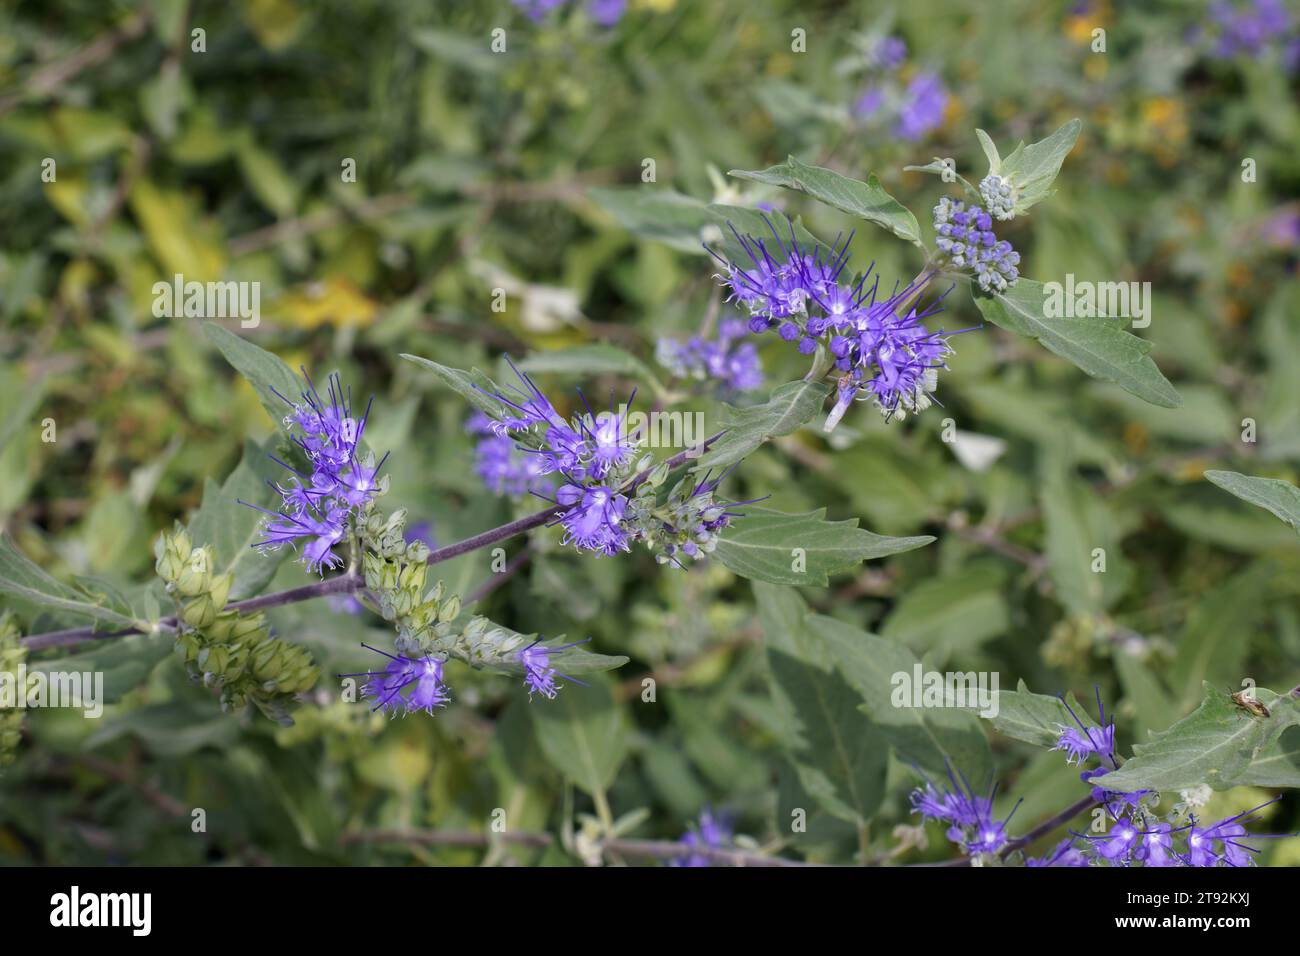 plant in bloom of Heavenly Blue or bluebeard, branch with flowers and leaves, Caryopteris × clandonensis, Lamiaceae Stock Photo